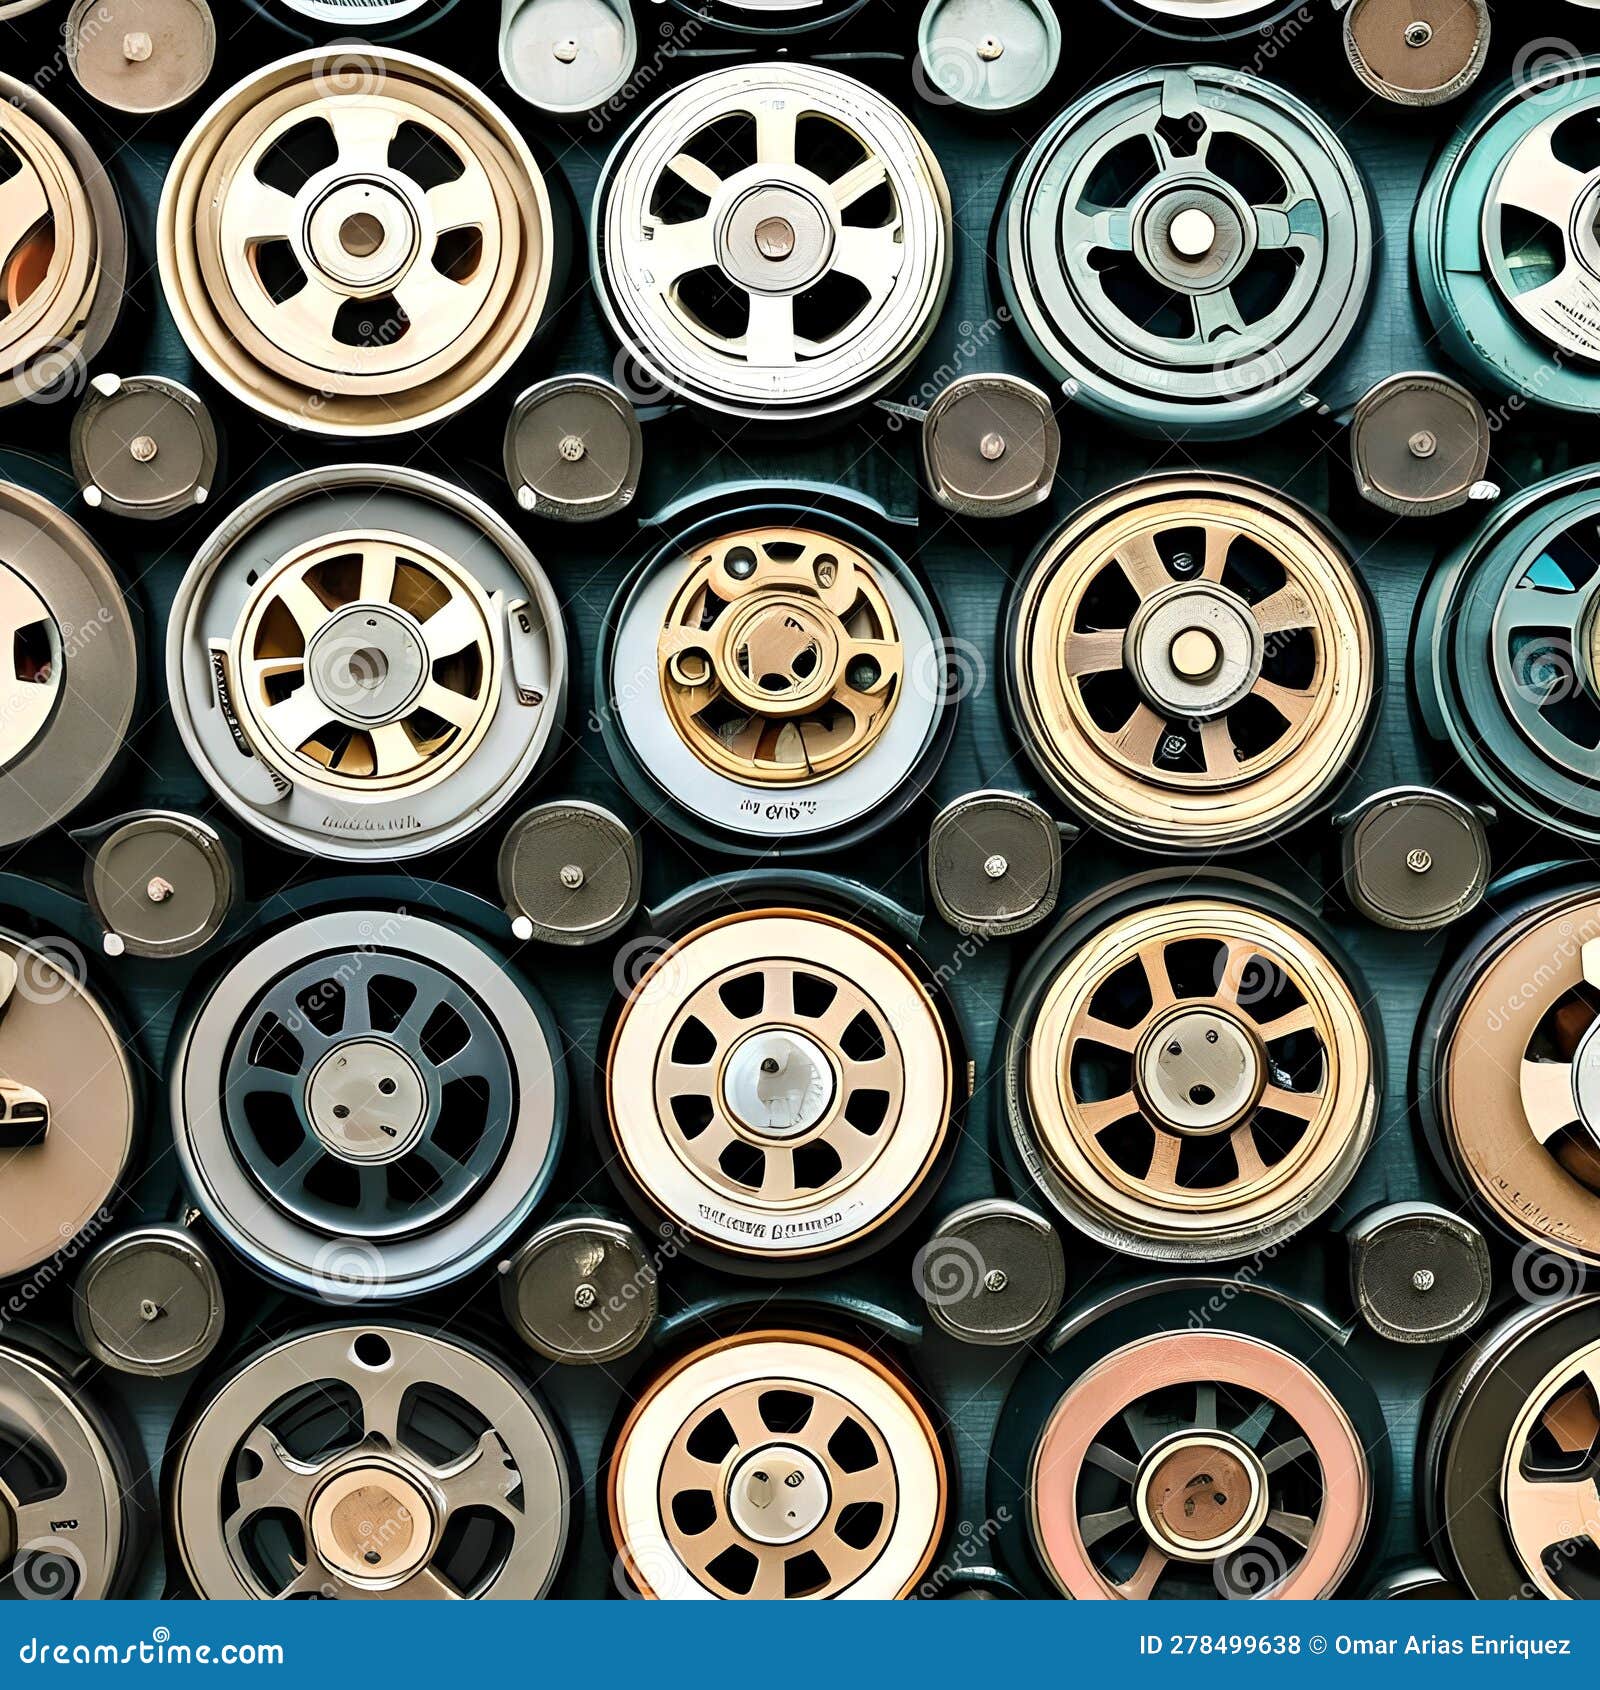 542 Vintage Film Reels: a Retro and Nostalgic Background Featuring